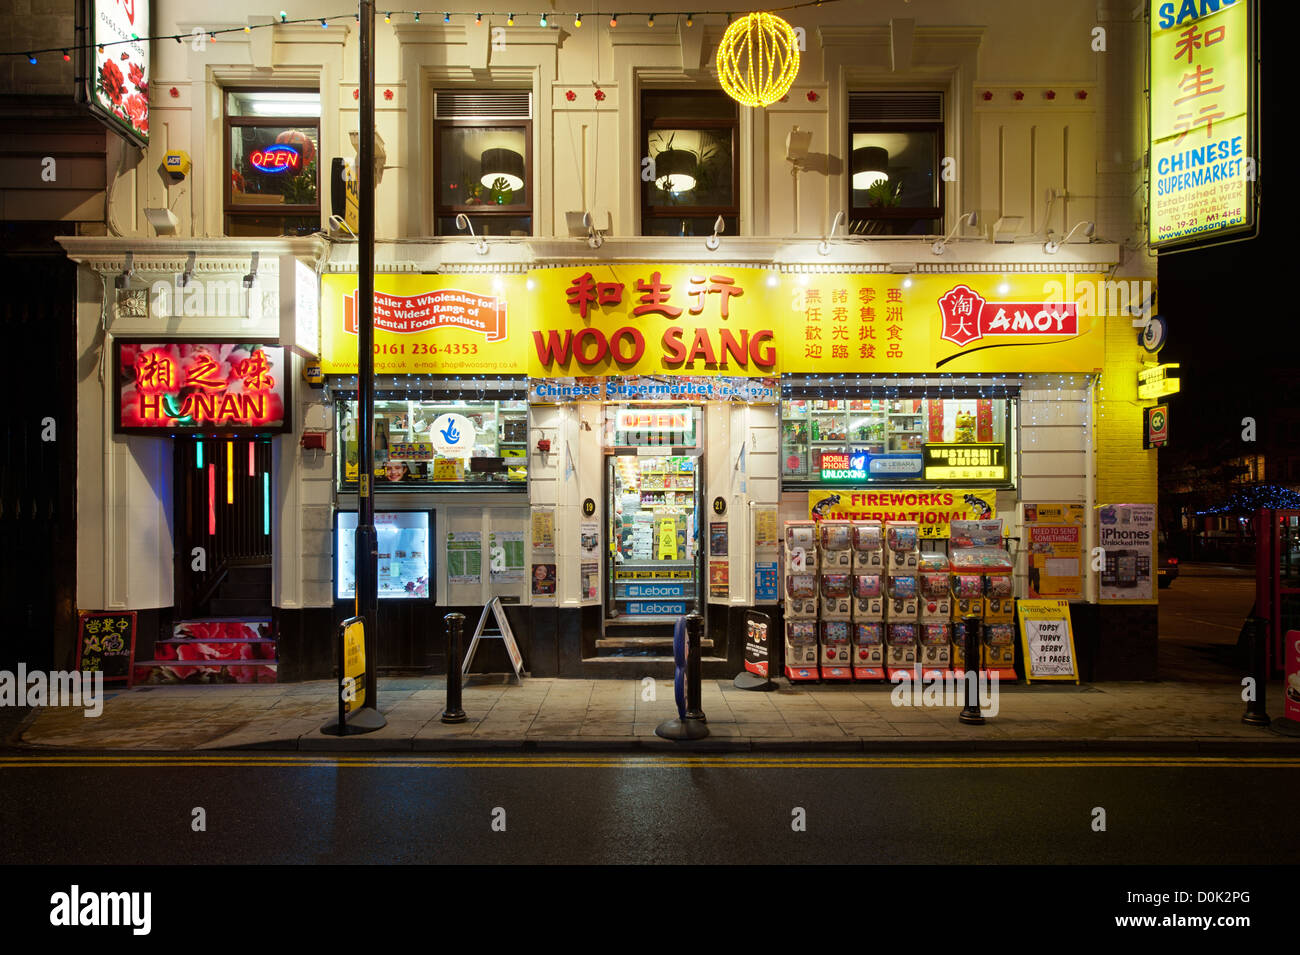 The Woo Sang Chinese supermarket in Chinatown in Manchester. Stock Photo